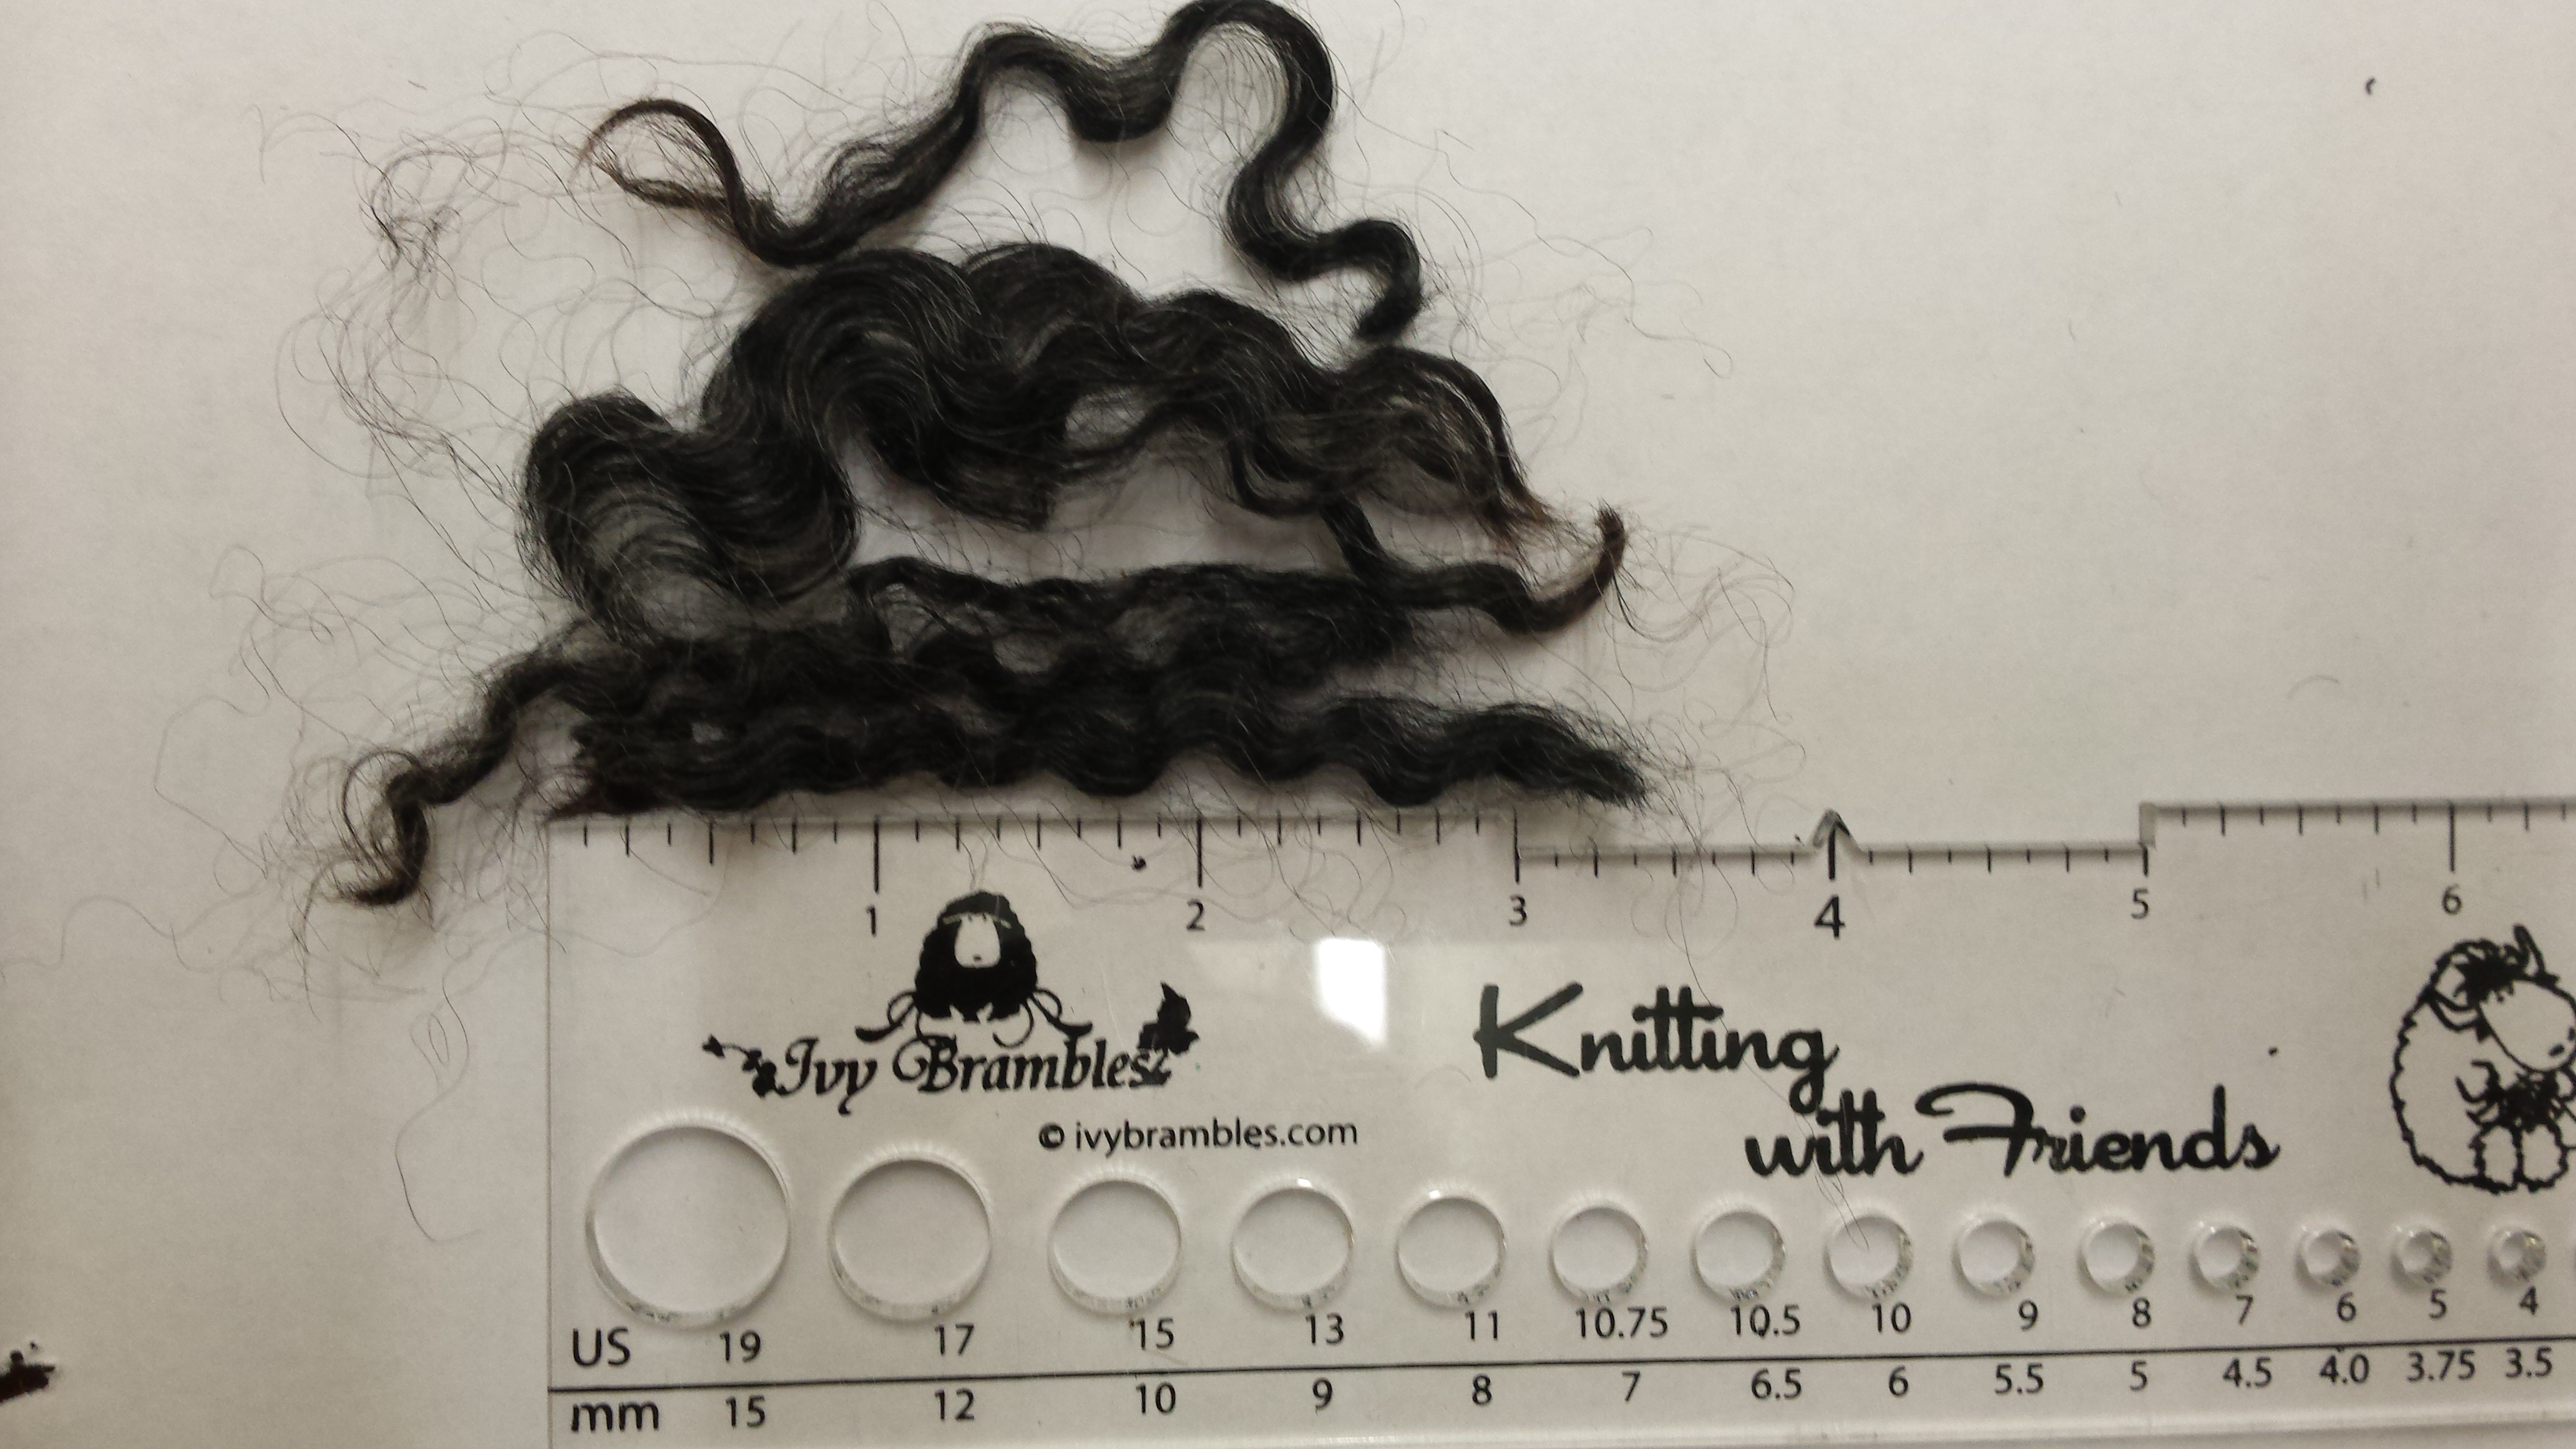 Border Leicester Curly Locks - Scoured - 1 oz - Dark Gray almost Black Coloring